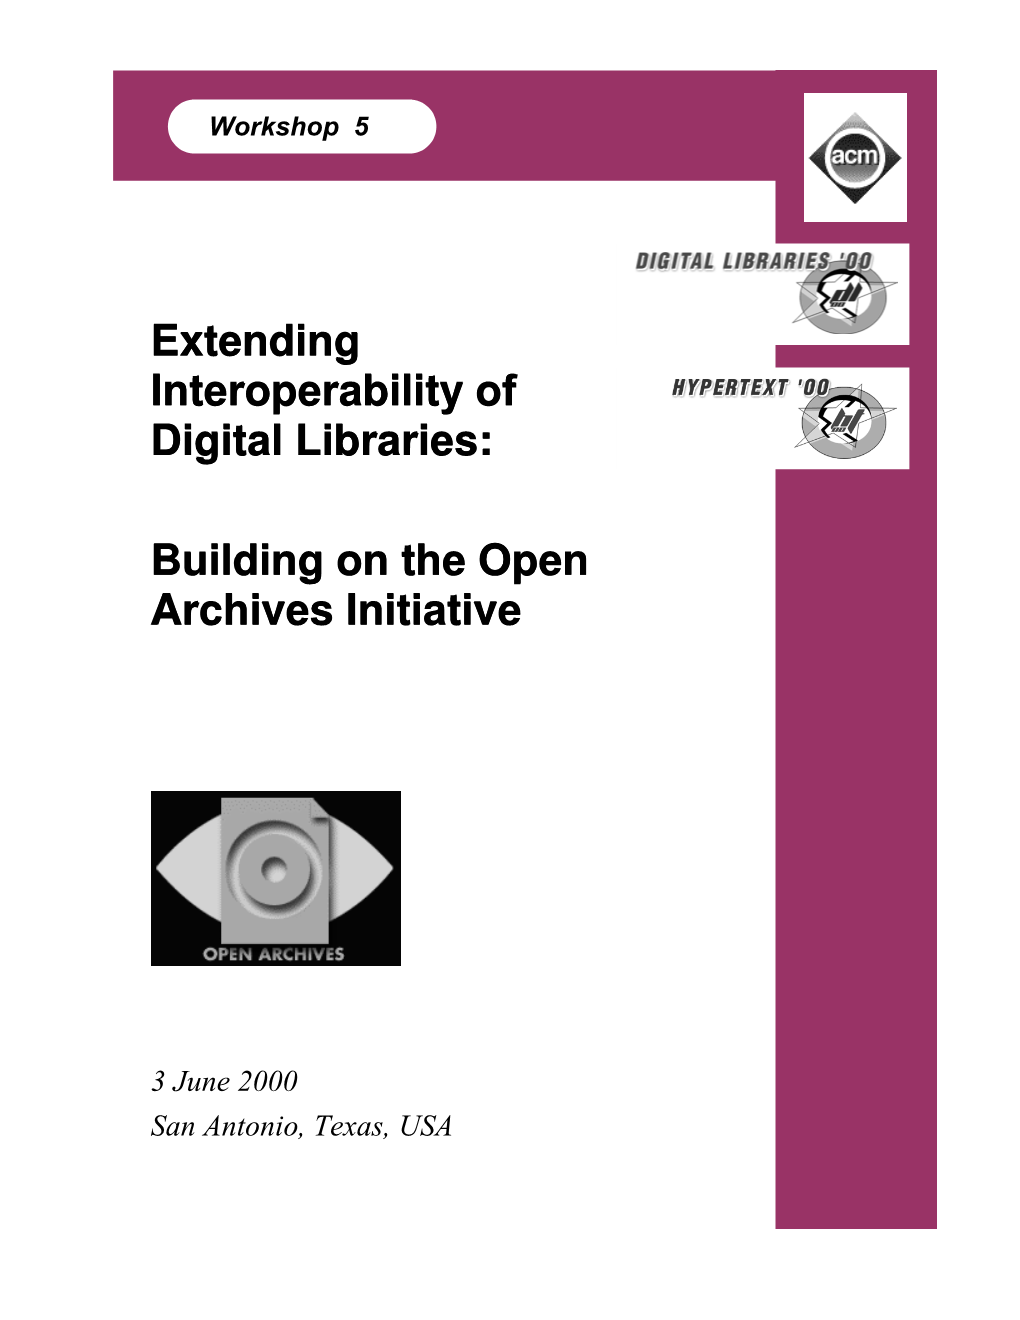 Extending Interoperability of Digital Libraries: Building on the Open